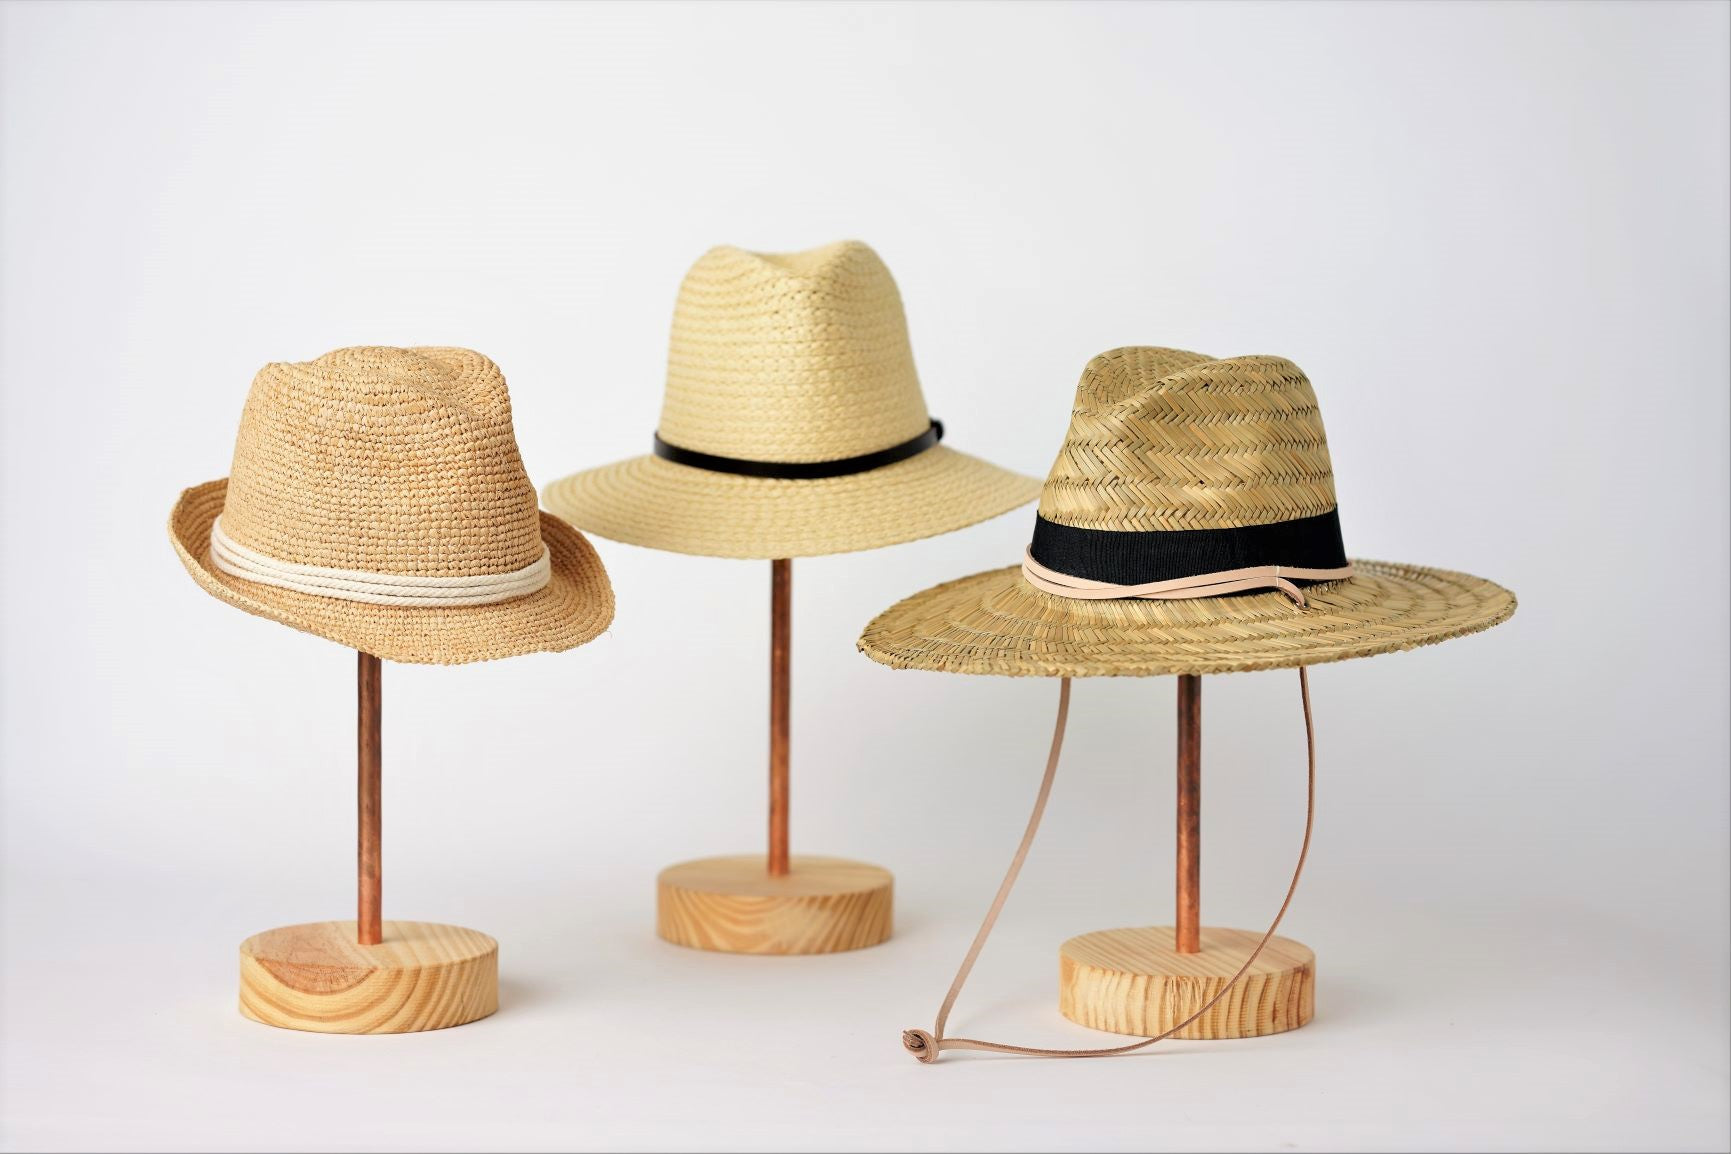 Collection of Anya & Niki straw hats, the Essential crochet straw hat with rope band, the Favorite Straw Hat with leather band, and the Tower Straw Hat with leather chin strap.